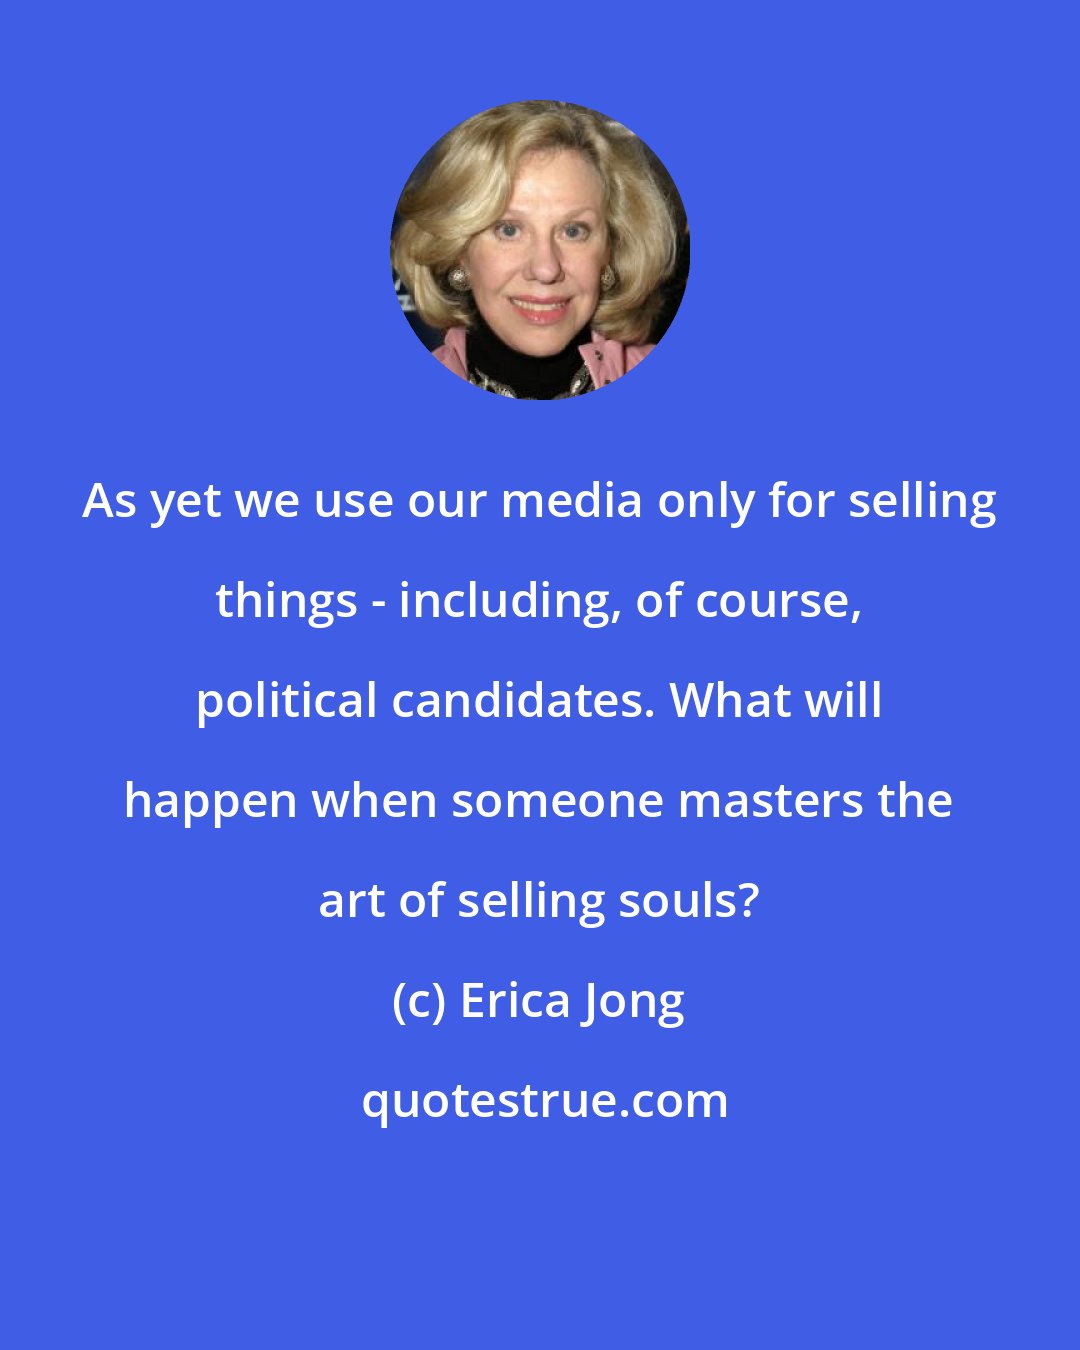 Erica Jong: As yet we use our media only for selling things - including, of course, political candidates. What will happen when someone masters the art of selling souls?